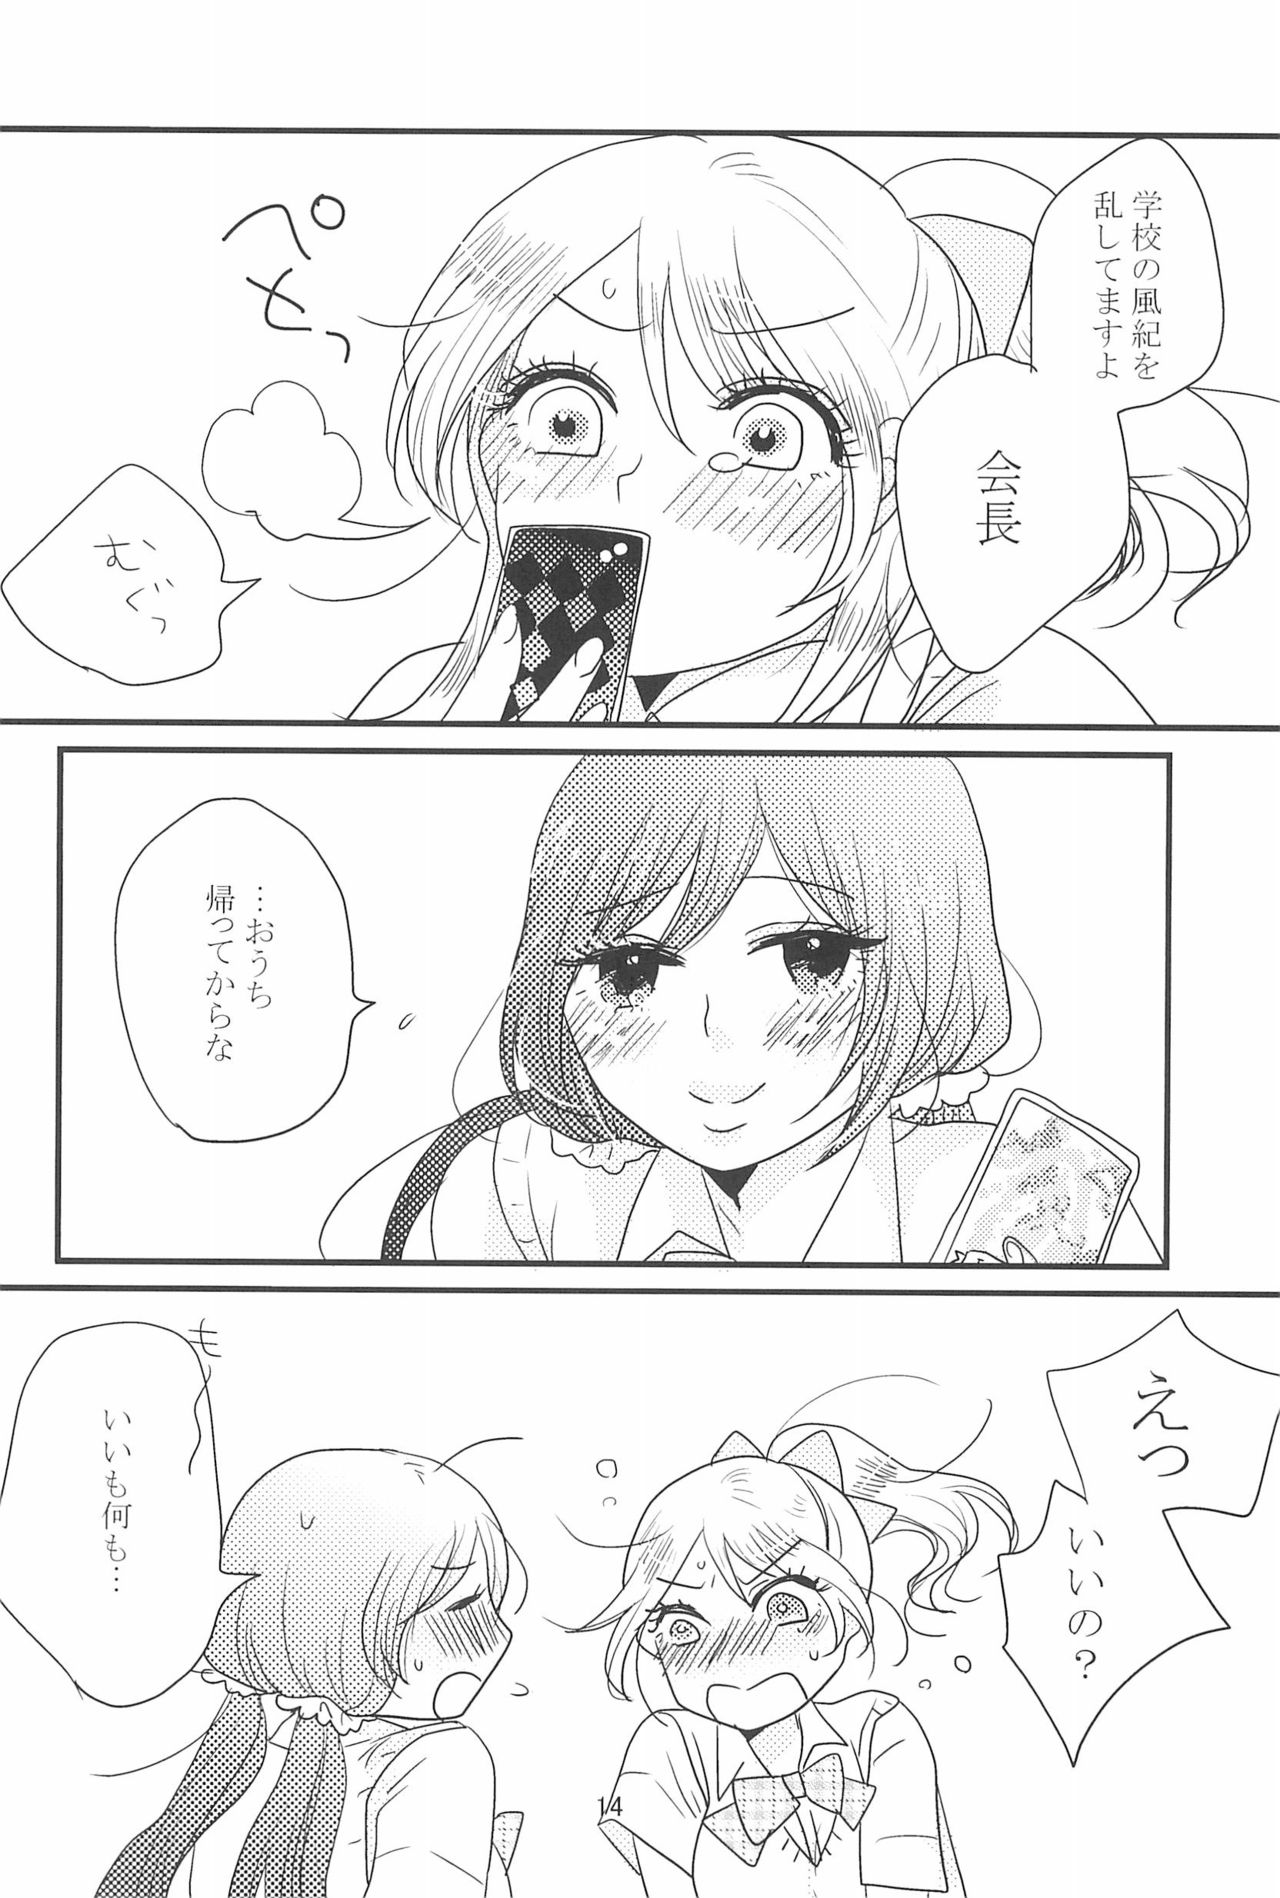 (C90) [BK*N2 (Mikawa Miso)] HAPPY GO LUCKY DAYS (Love Live!) page 18 full